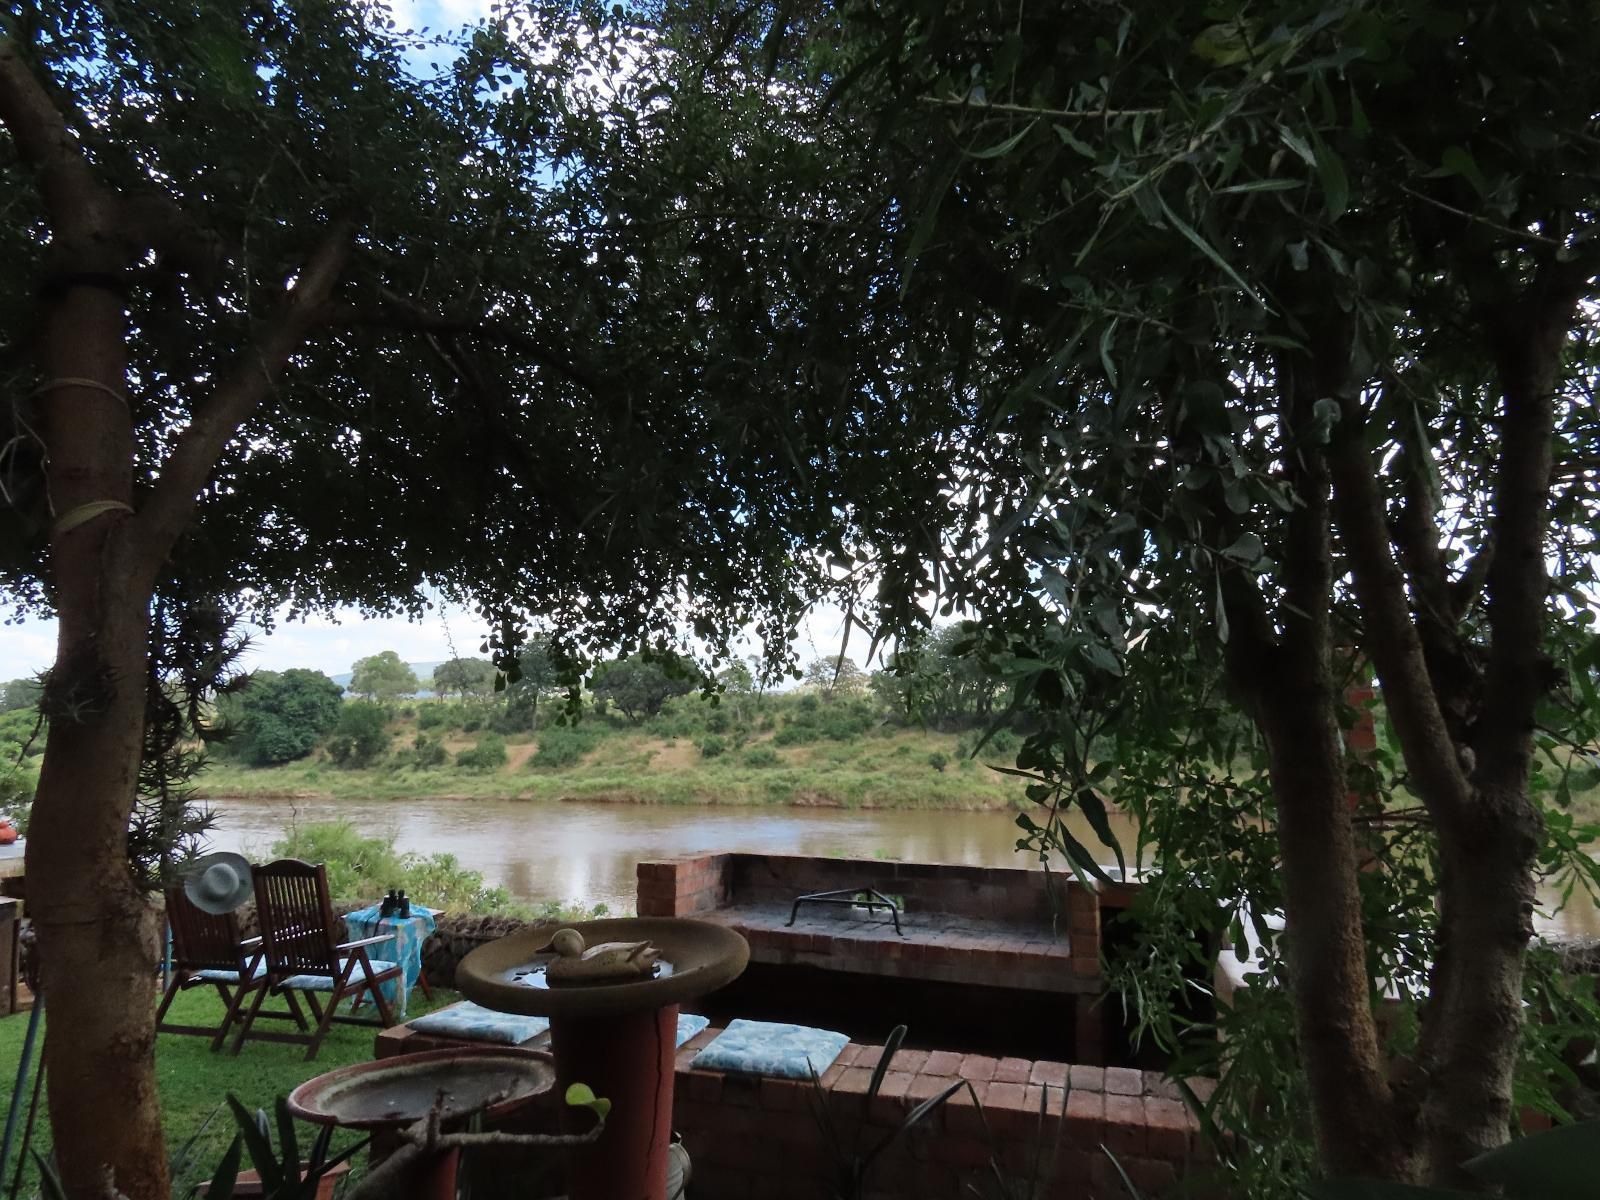 Hennie S Rest Guest House Malelane Mpumalanga South Africa Boat, Vehicle, River, Nature, Waters